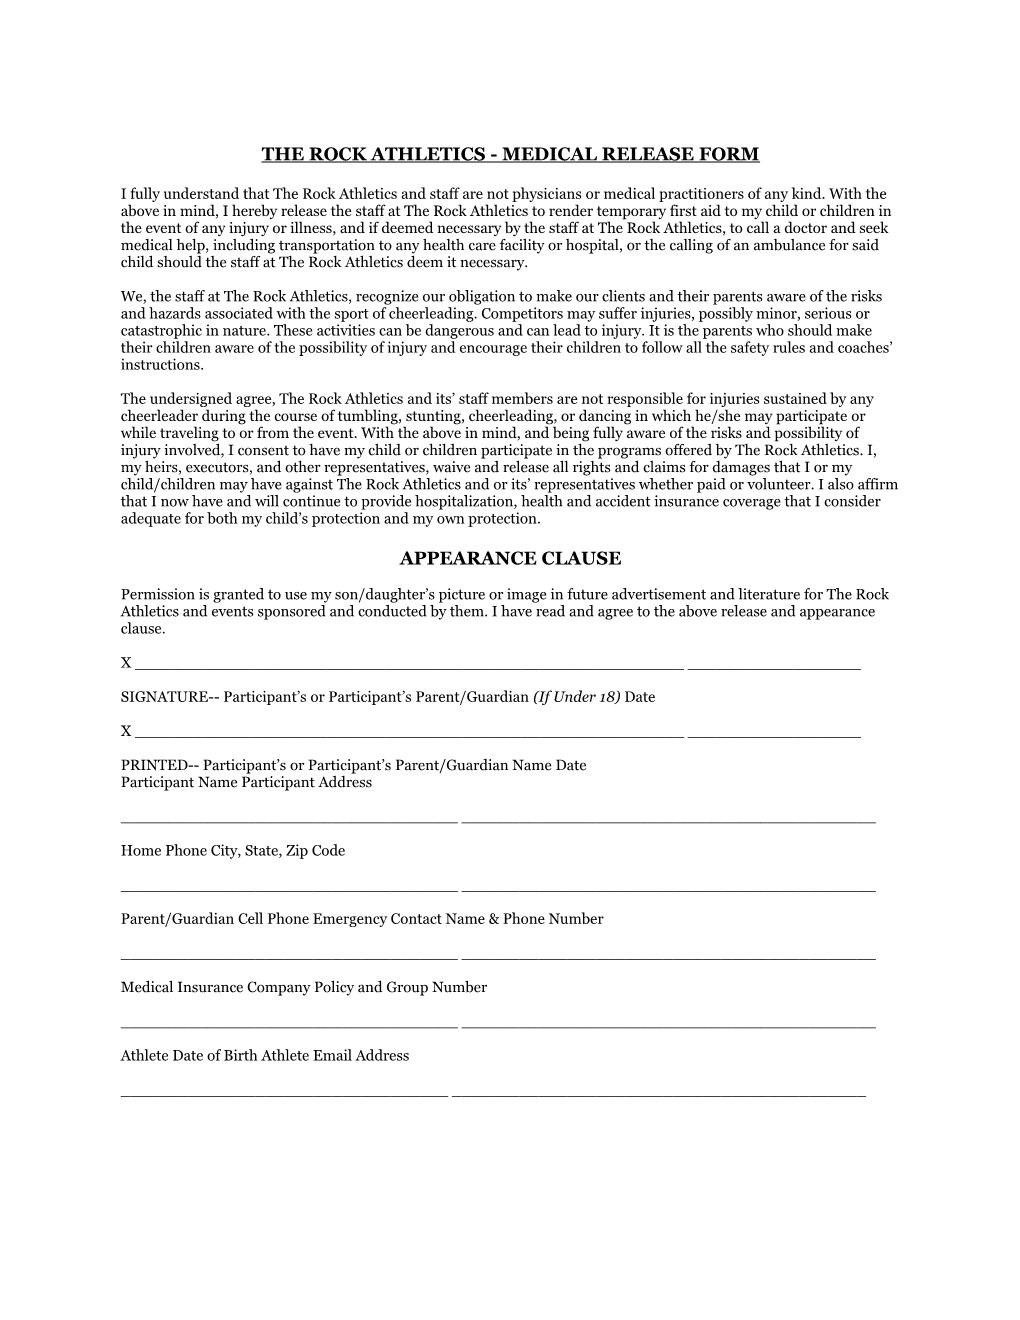 The Rock Athletics - Medical Release Form